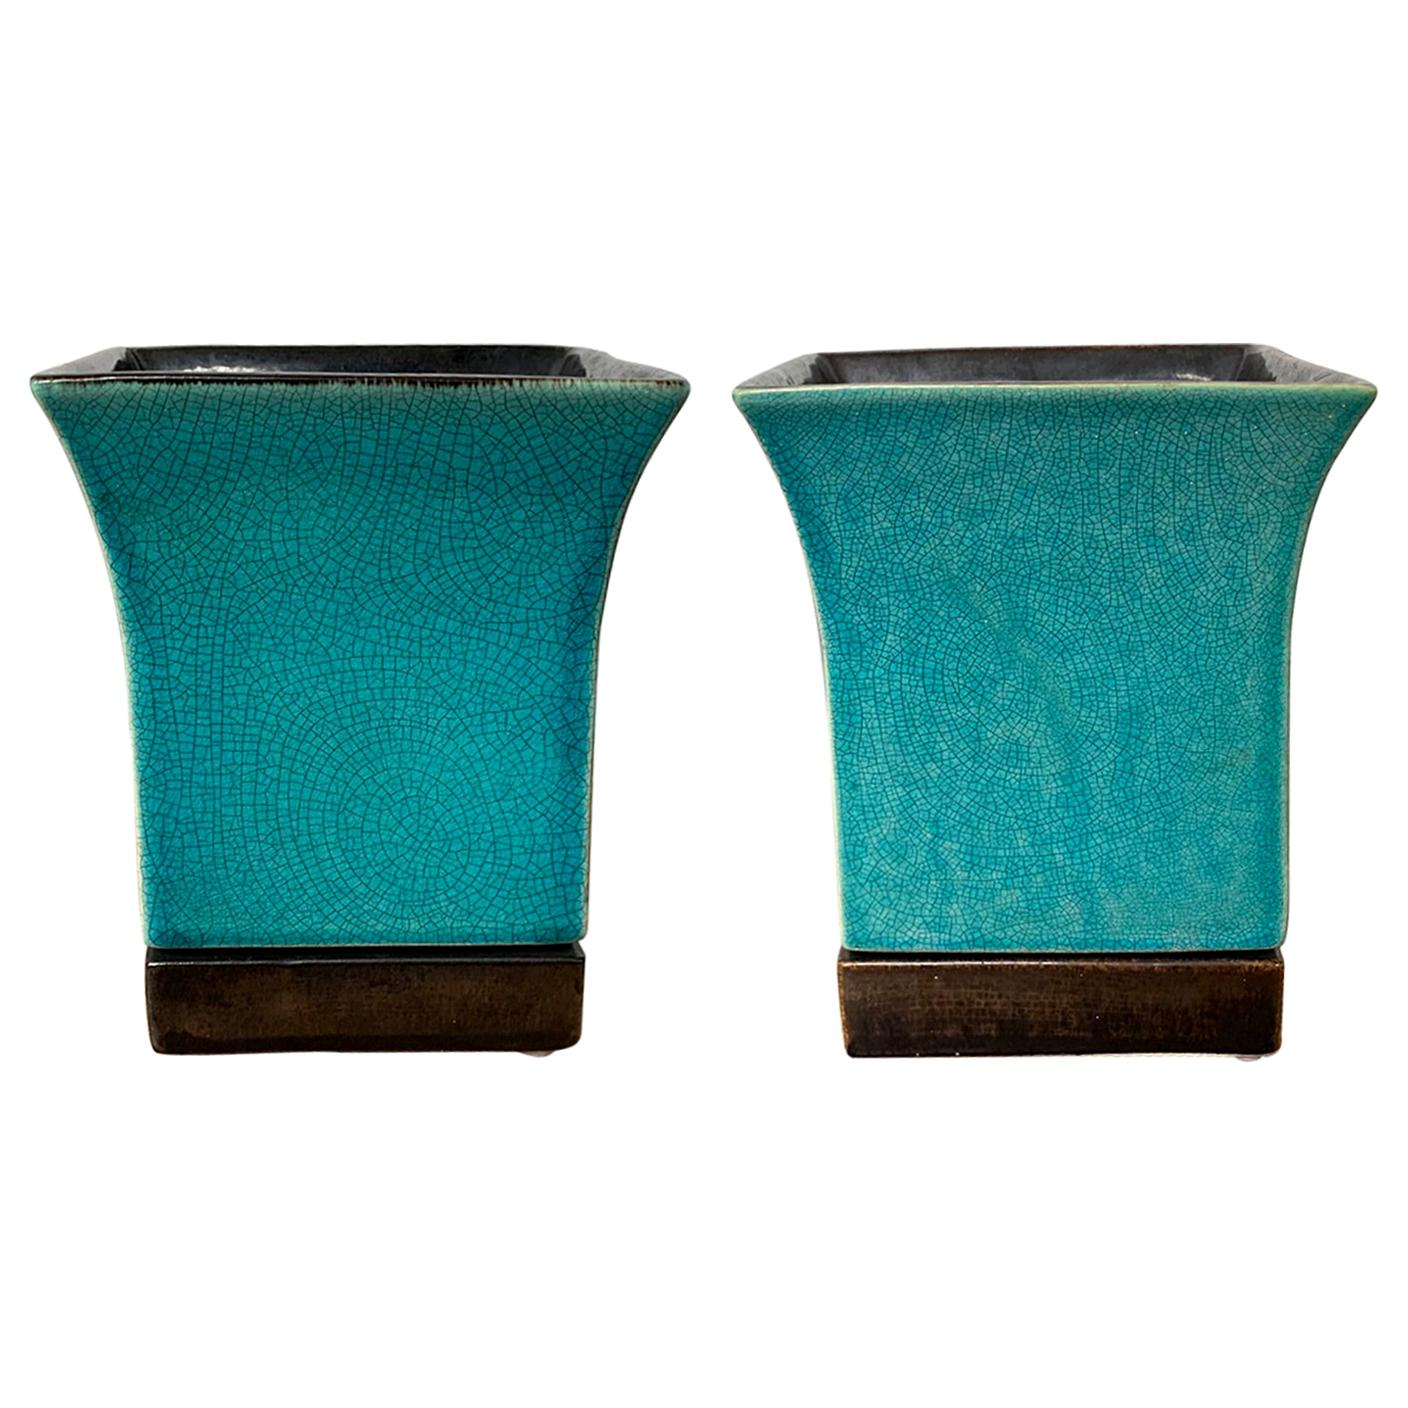 Pair of Red Wing Pottery Turquoise Blue Square Glazed Pottery Vases, Marked